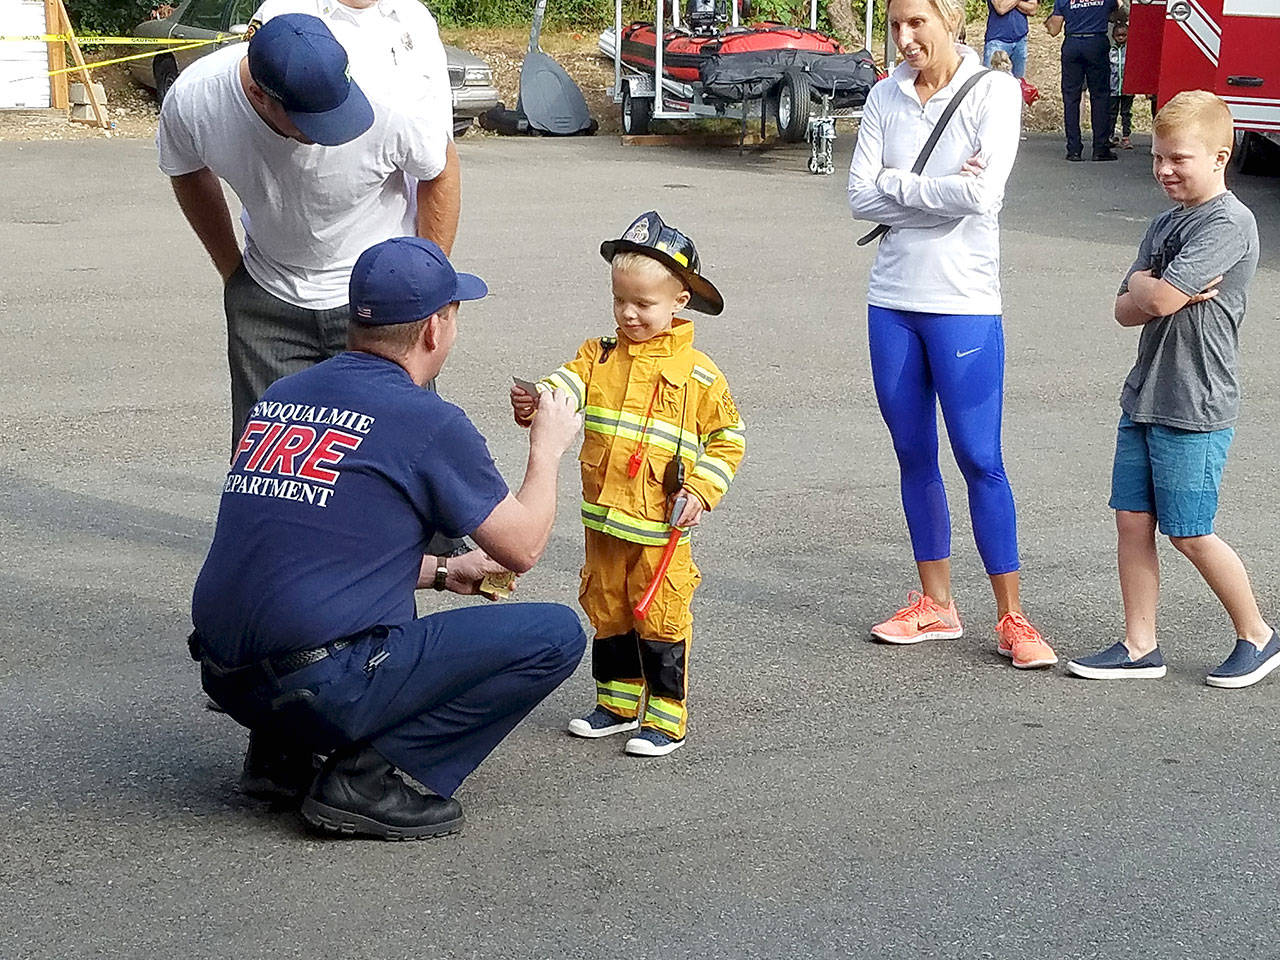 Photo courtesy of Peter O’Donnell                                The Snoqualmie Firefighters Association is holding its annual Pancake Breakfast and Silent Auction from 7 a.m. to 11 a.m. on Aug. 17.